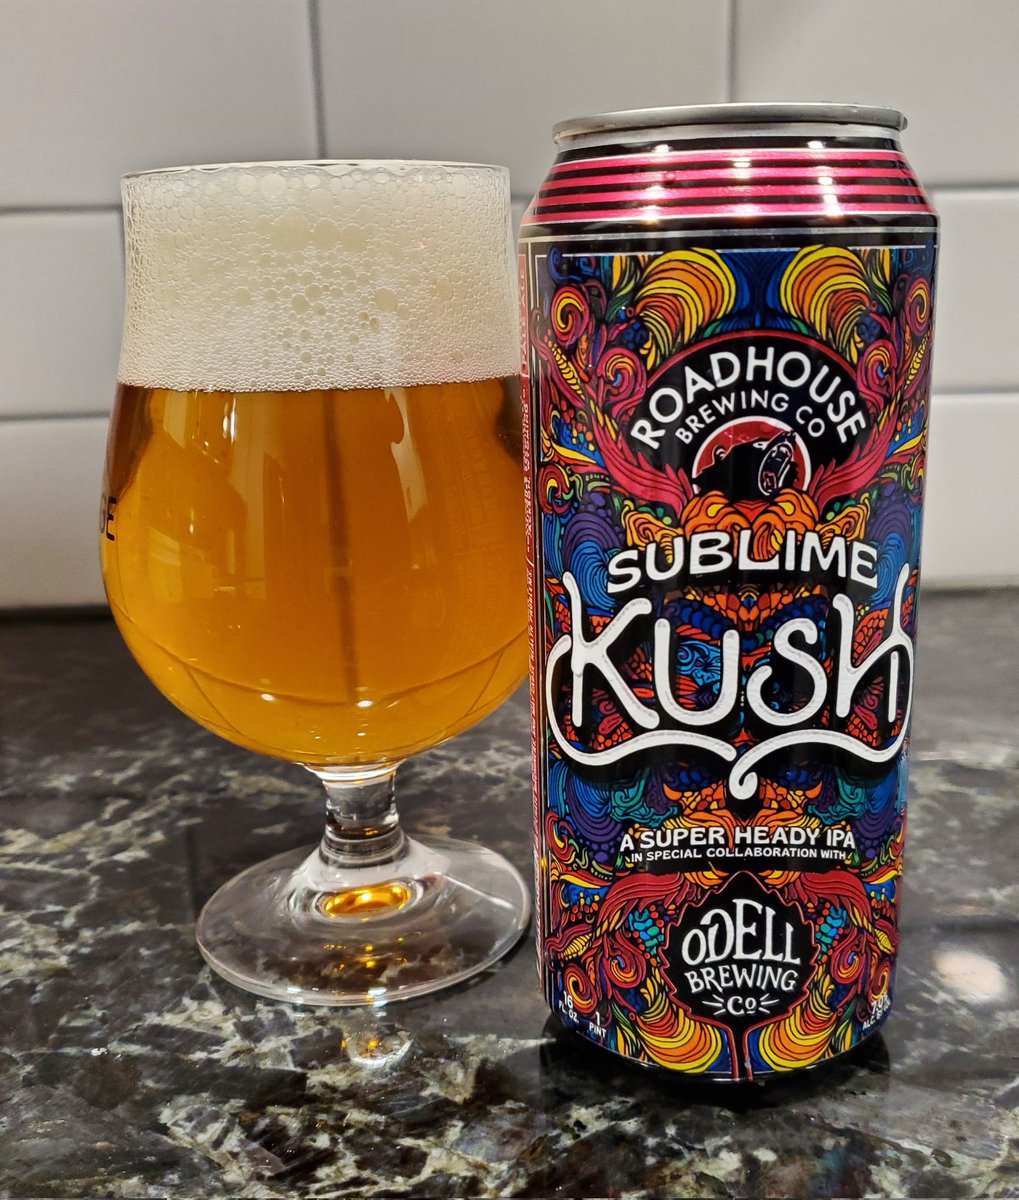 Sublime Kush IPA collab. With Roadhouse Brewing (Jackson, WY) and Odell Brewing (Fort Collins, CO) 
This is a great beer! Great can art too!
Comes in at 7.0%
@ephoustonbill @Senor_Greezy @JohanBBT @BPlohocky @RealBMaxwell @ZombieWWZ @D_V_T_ @badhopper 
#craftbeer #beer #goodbeer